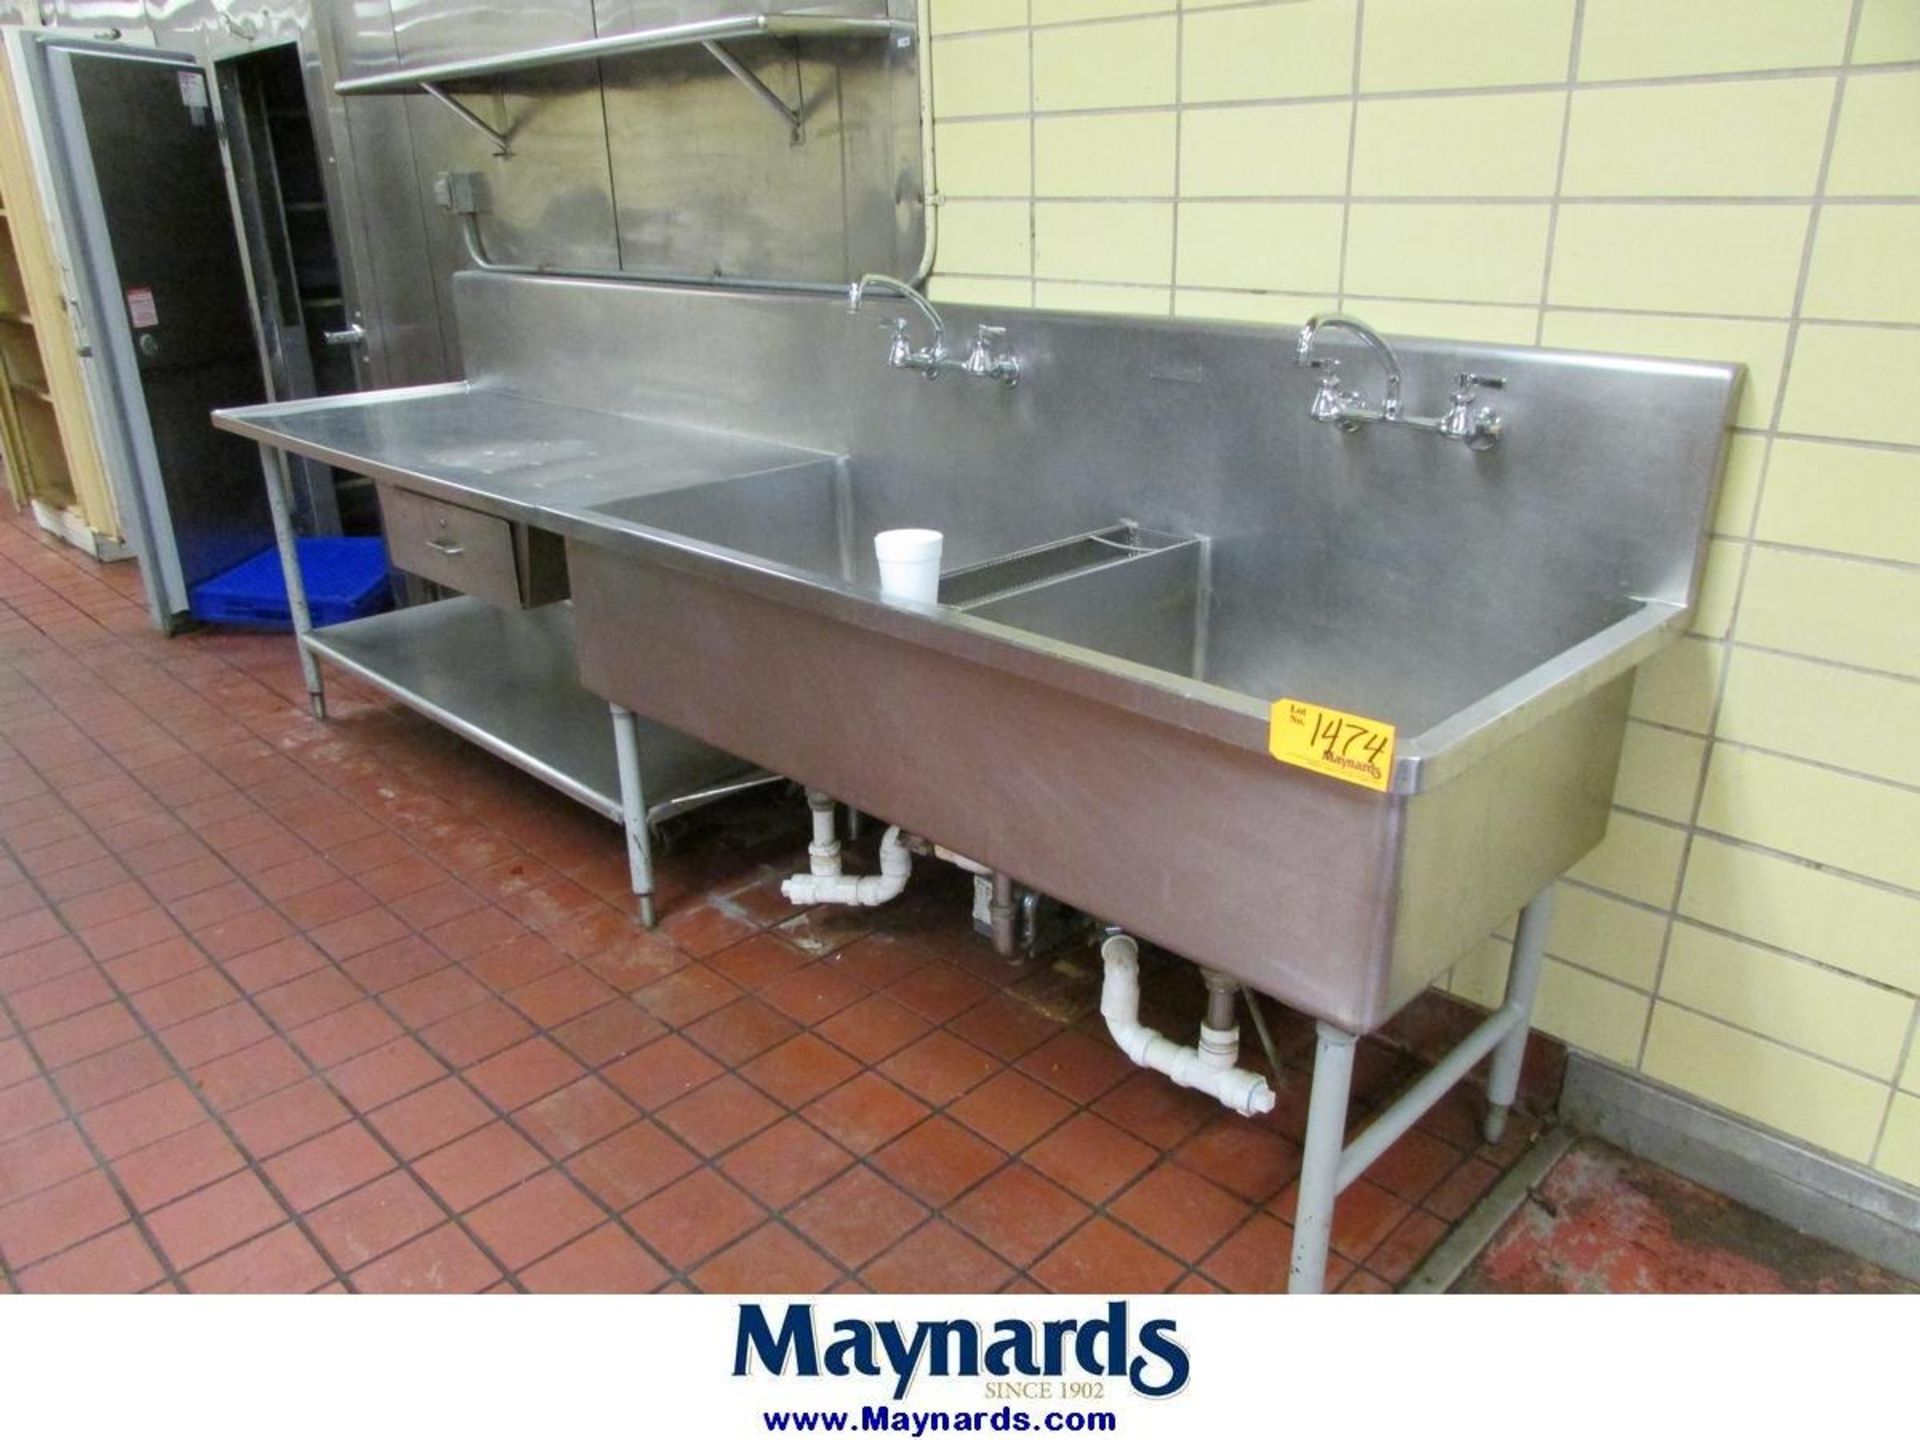 132"x28" Stainless Steel Commercial Dual Basin Kitchen Sink and Counter